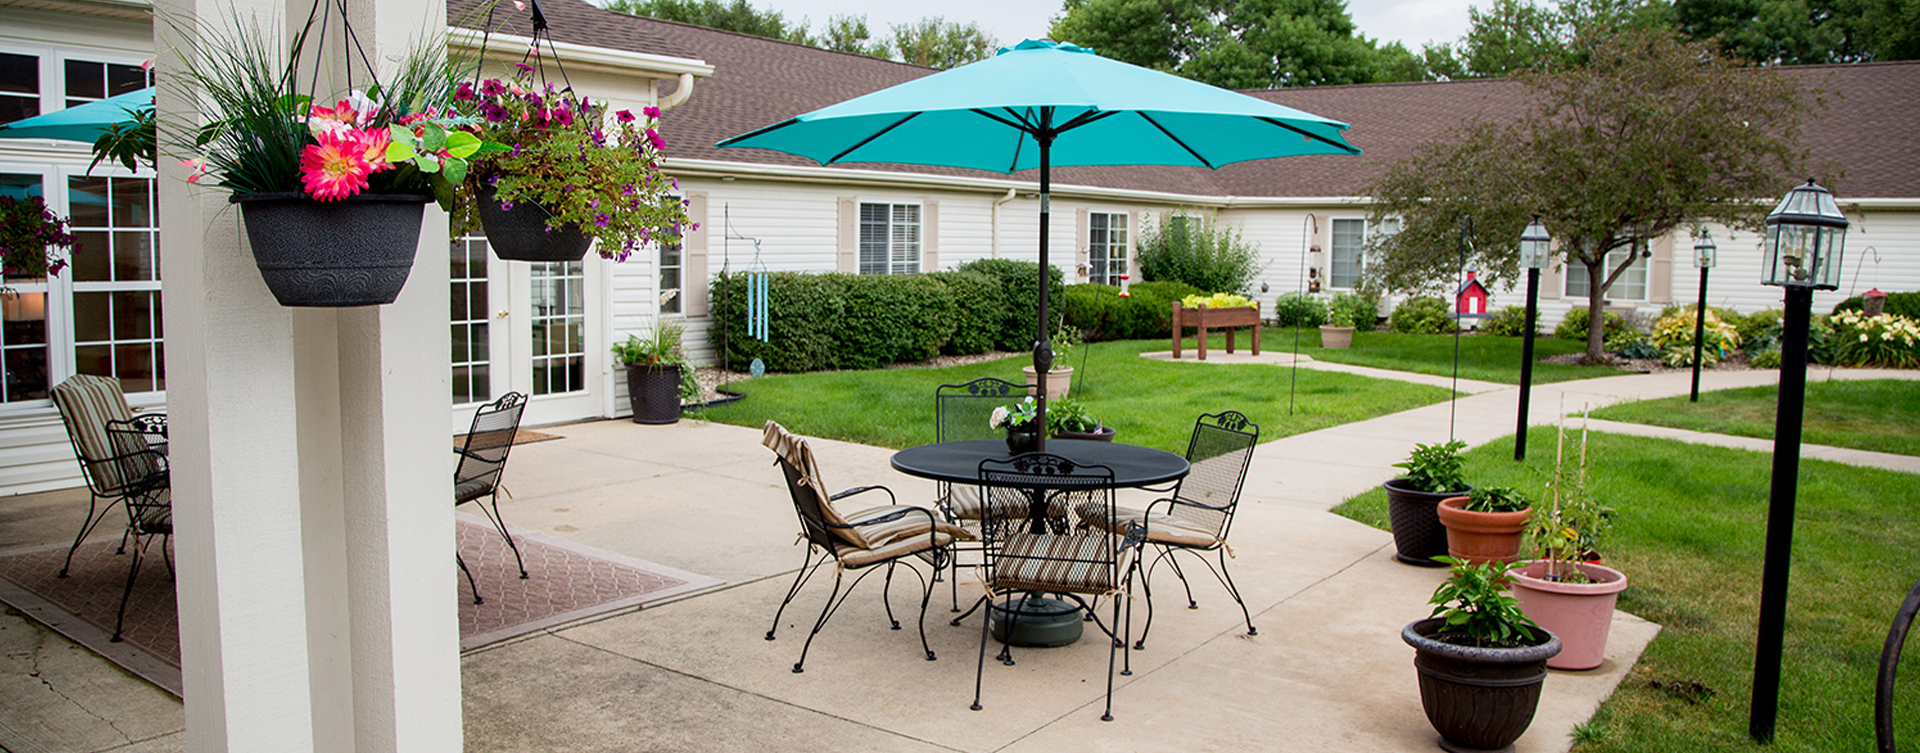 Enjoy bird watching, gardening and barbecuing in our courtyard at Bickford of Fort Dodge